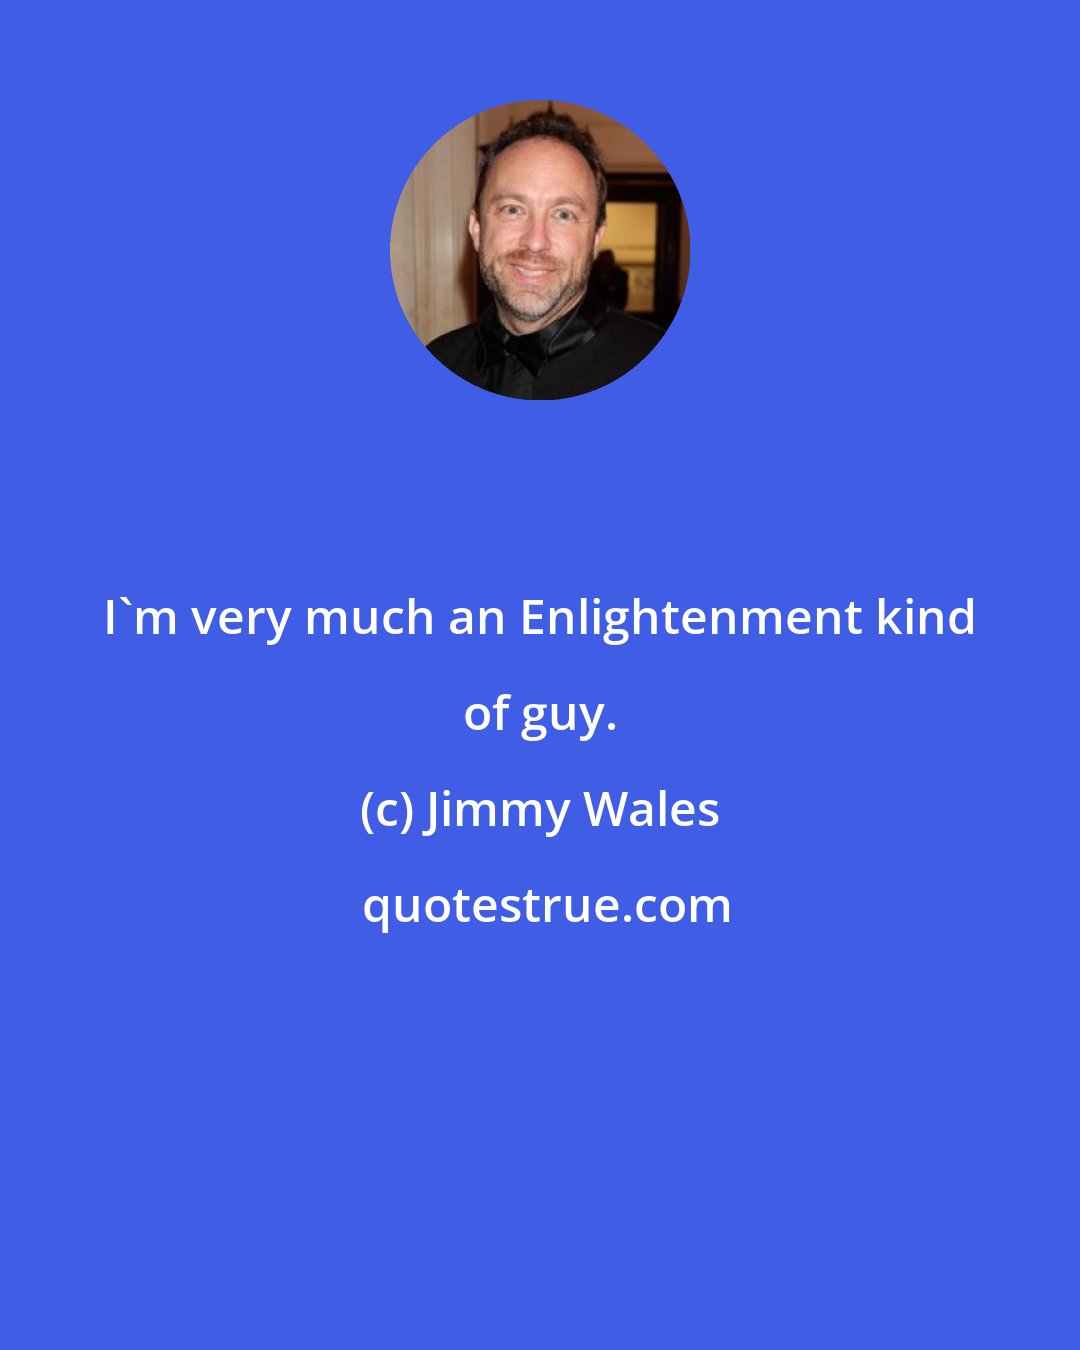 Jimmy Wales: I'm very much an Enlightenment kind of guy.